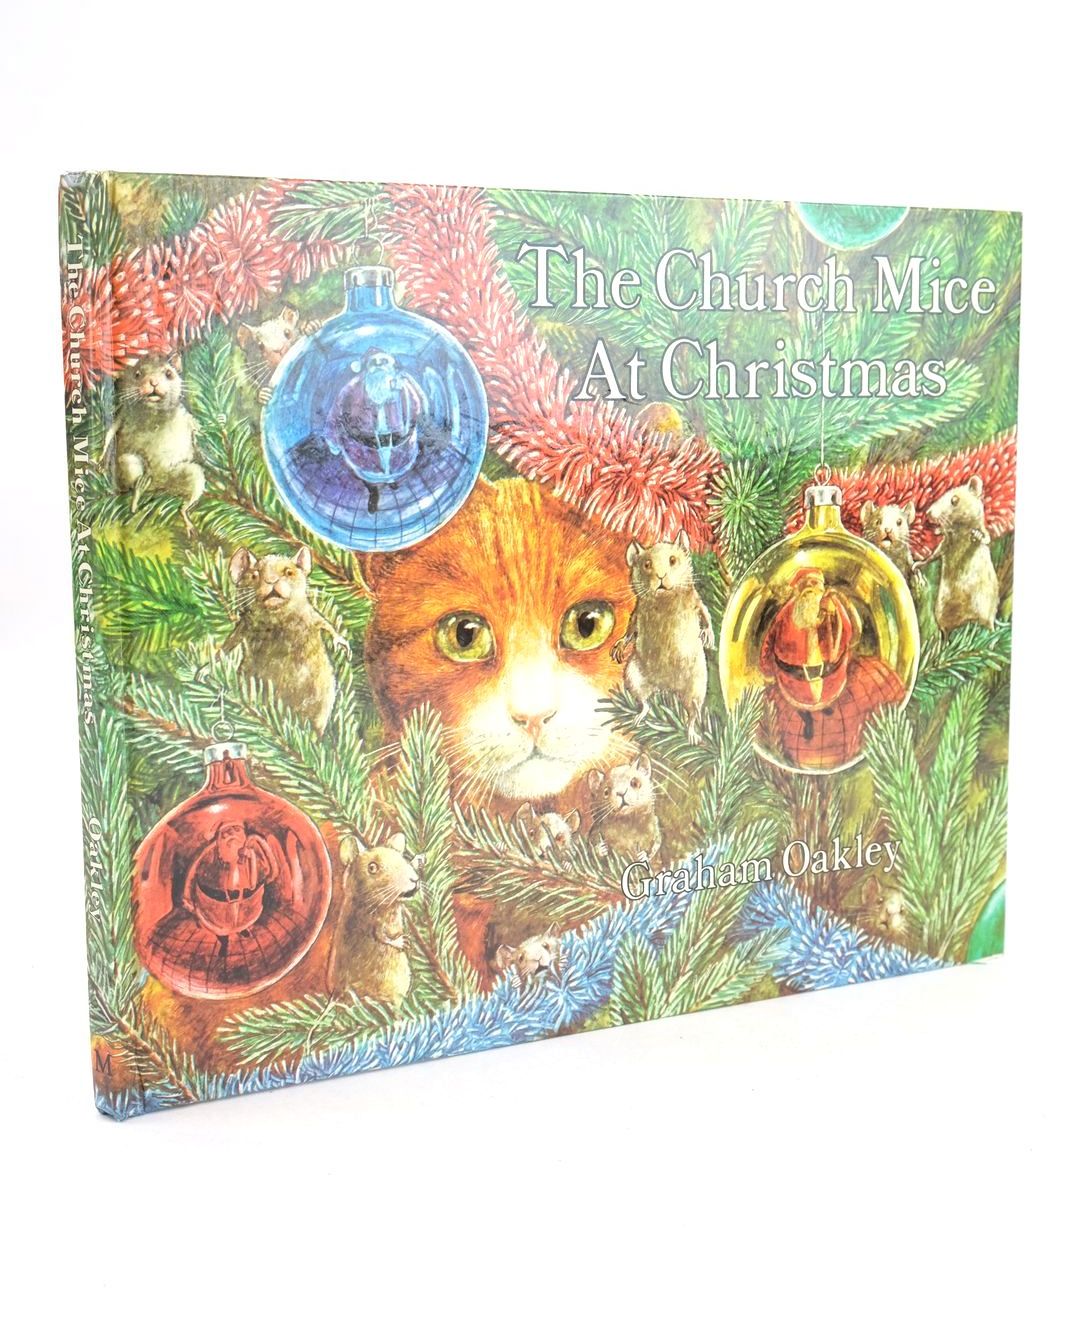 Photo of THE CHURCH MICE AT CHRISTMAS written by Oakley, Graham illustrated by Oakley, Graham published by Macmillan Children's Books (STOCK CODE: 1325667)  for sale by Stella & Rose's Books